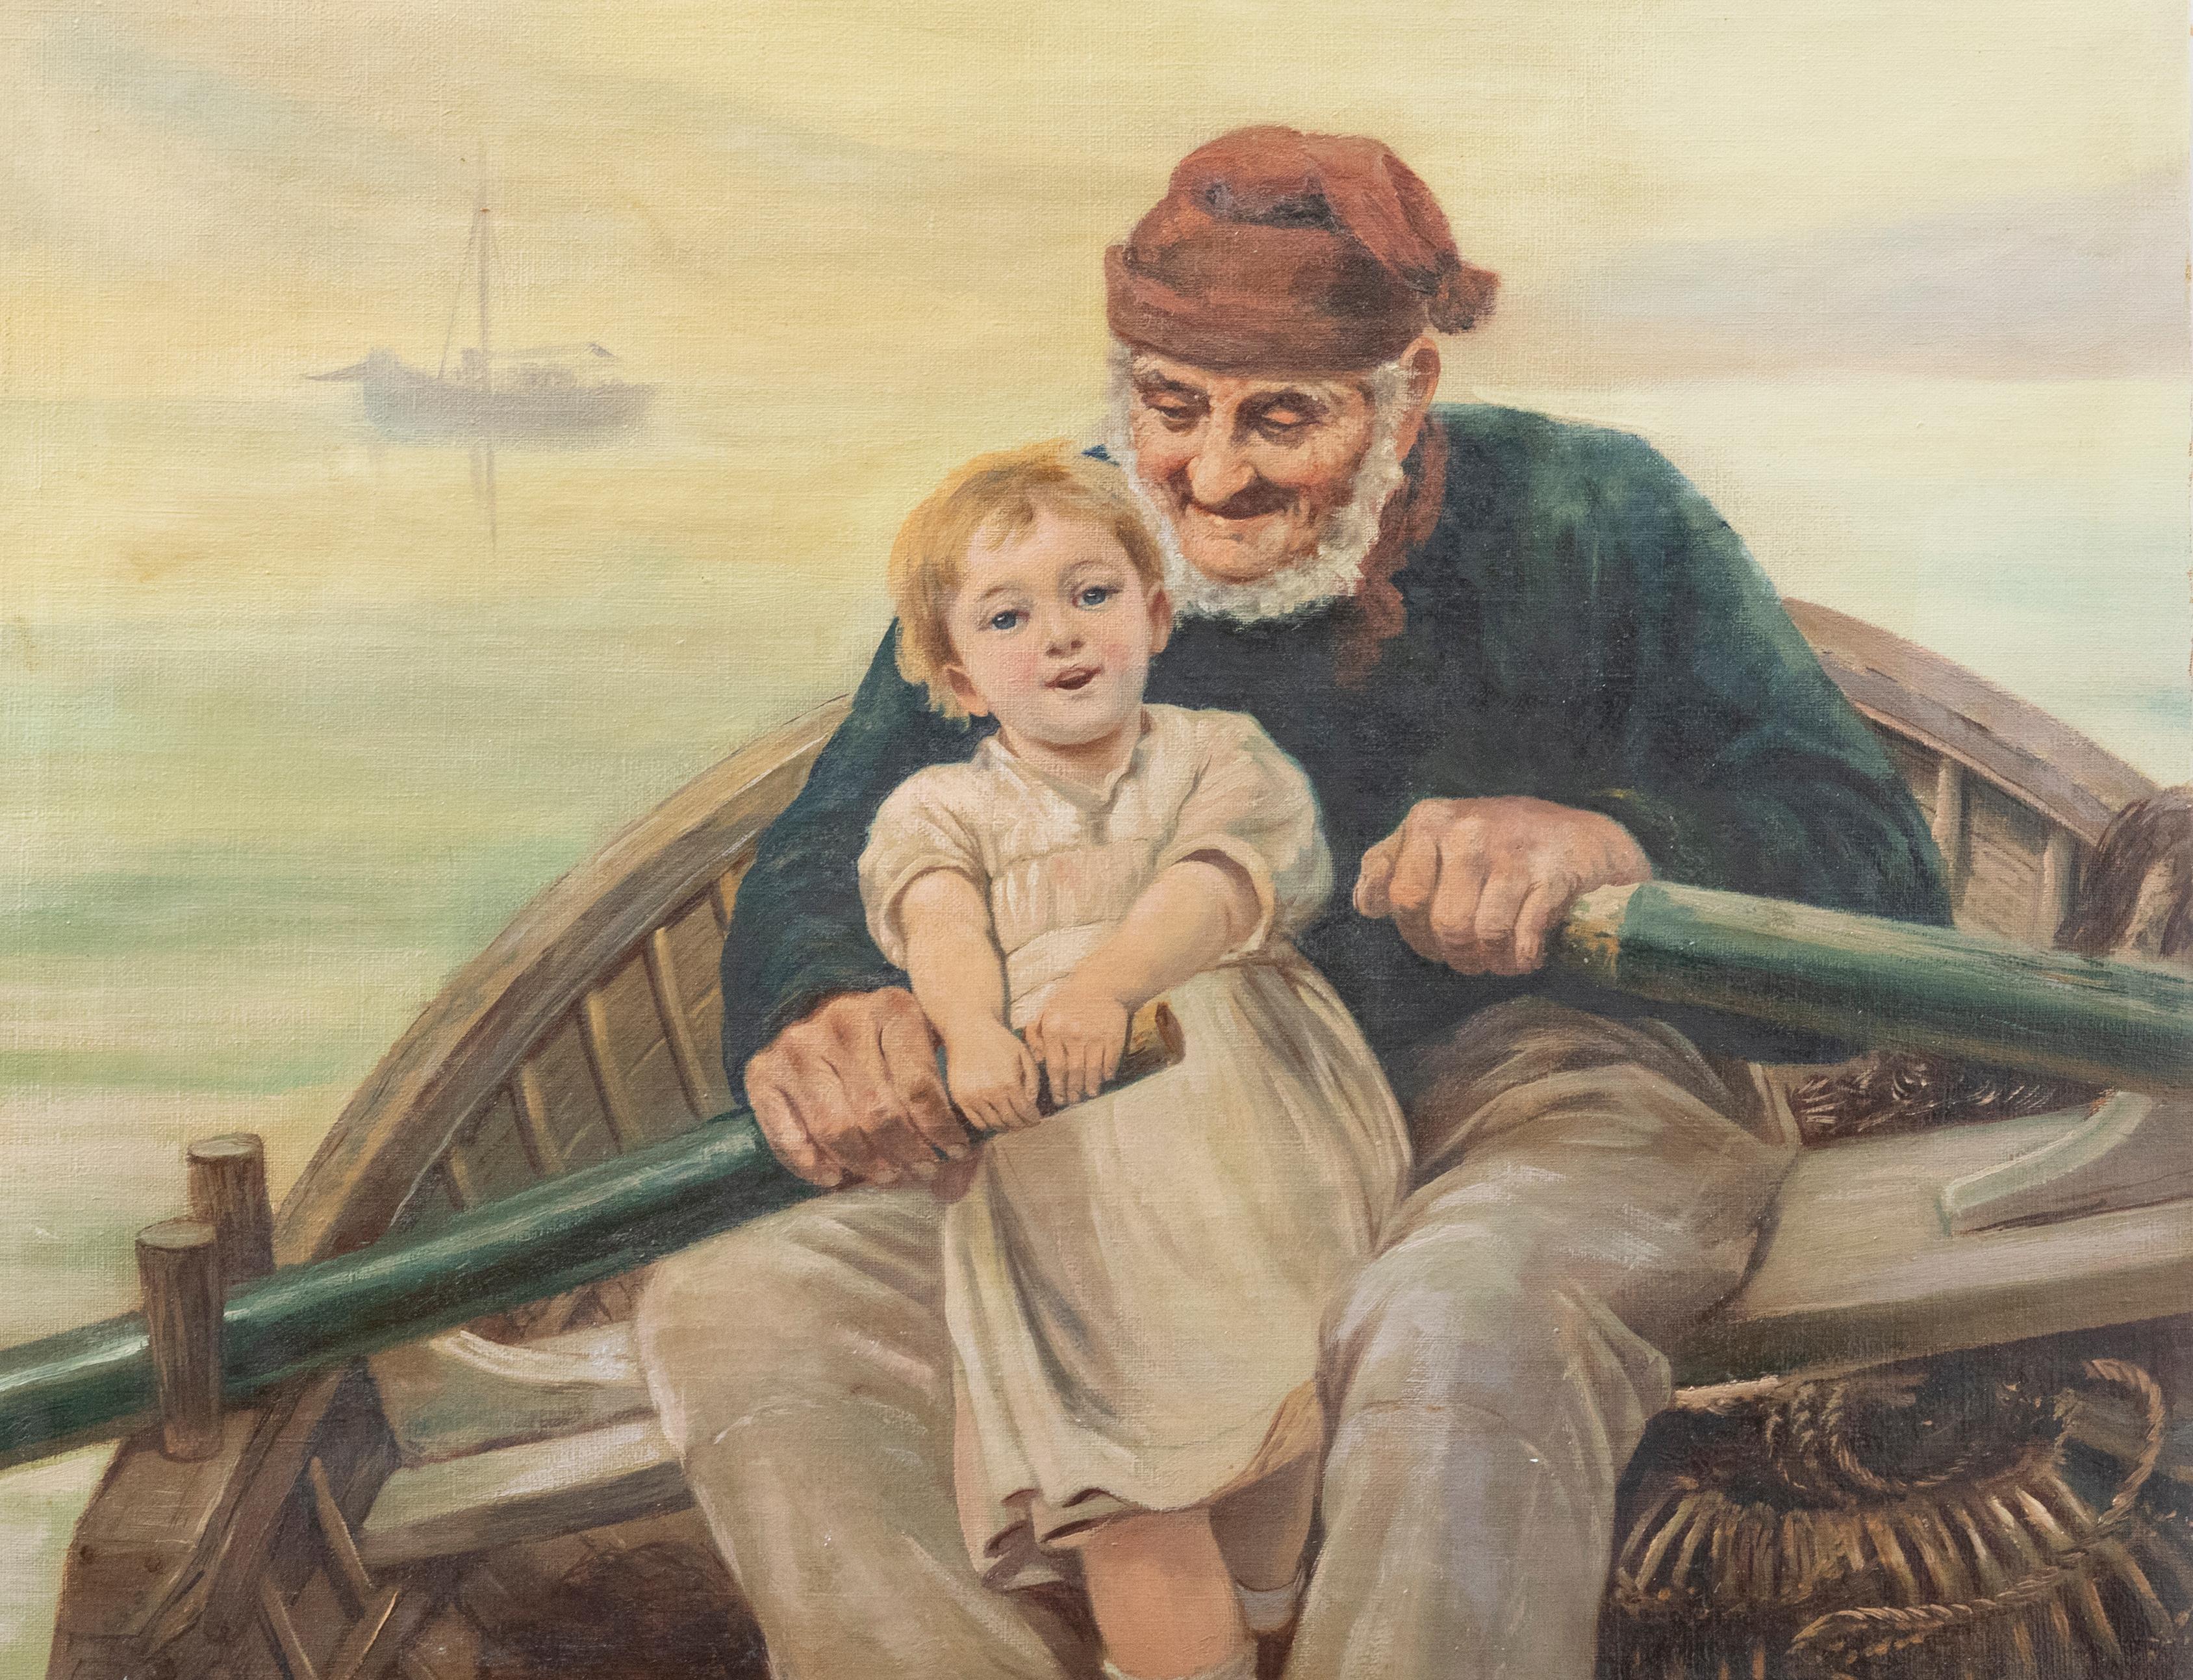 Unknown Figurative Painting - Manner of Emile Renouf  - Early 20th Century Oil, Rowing Lessons